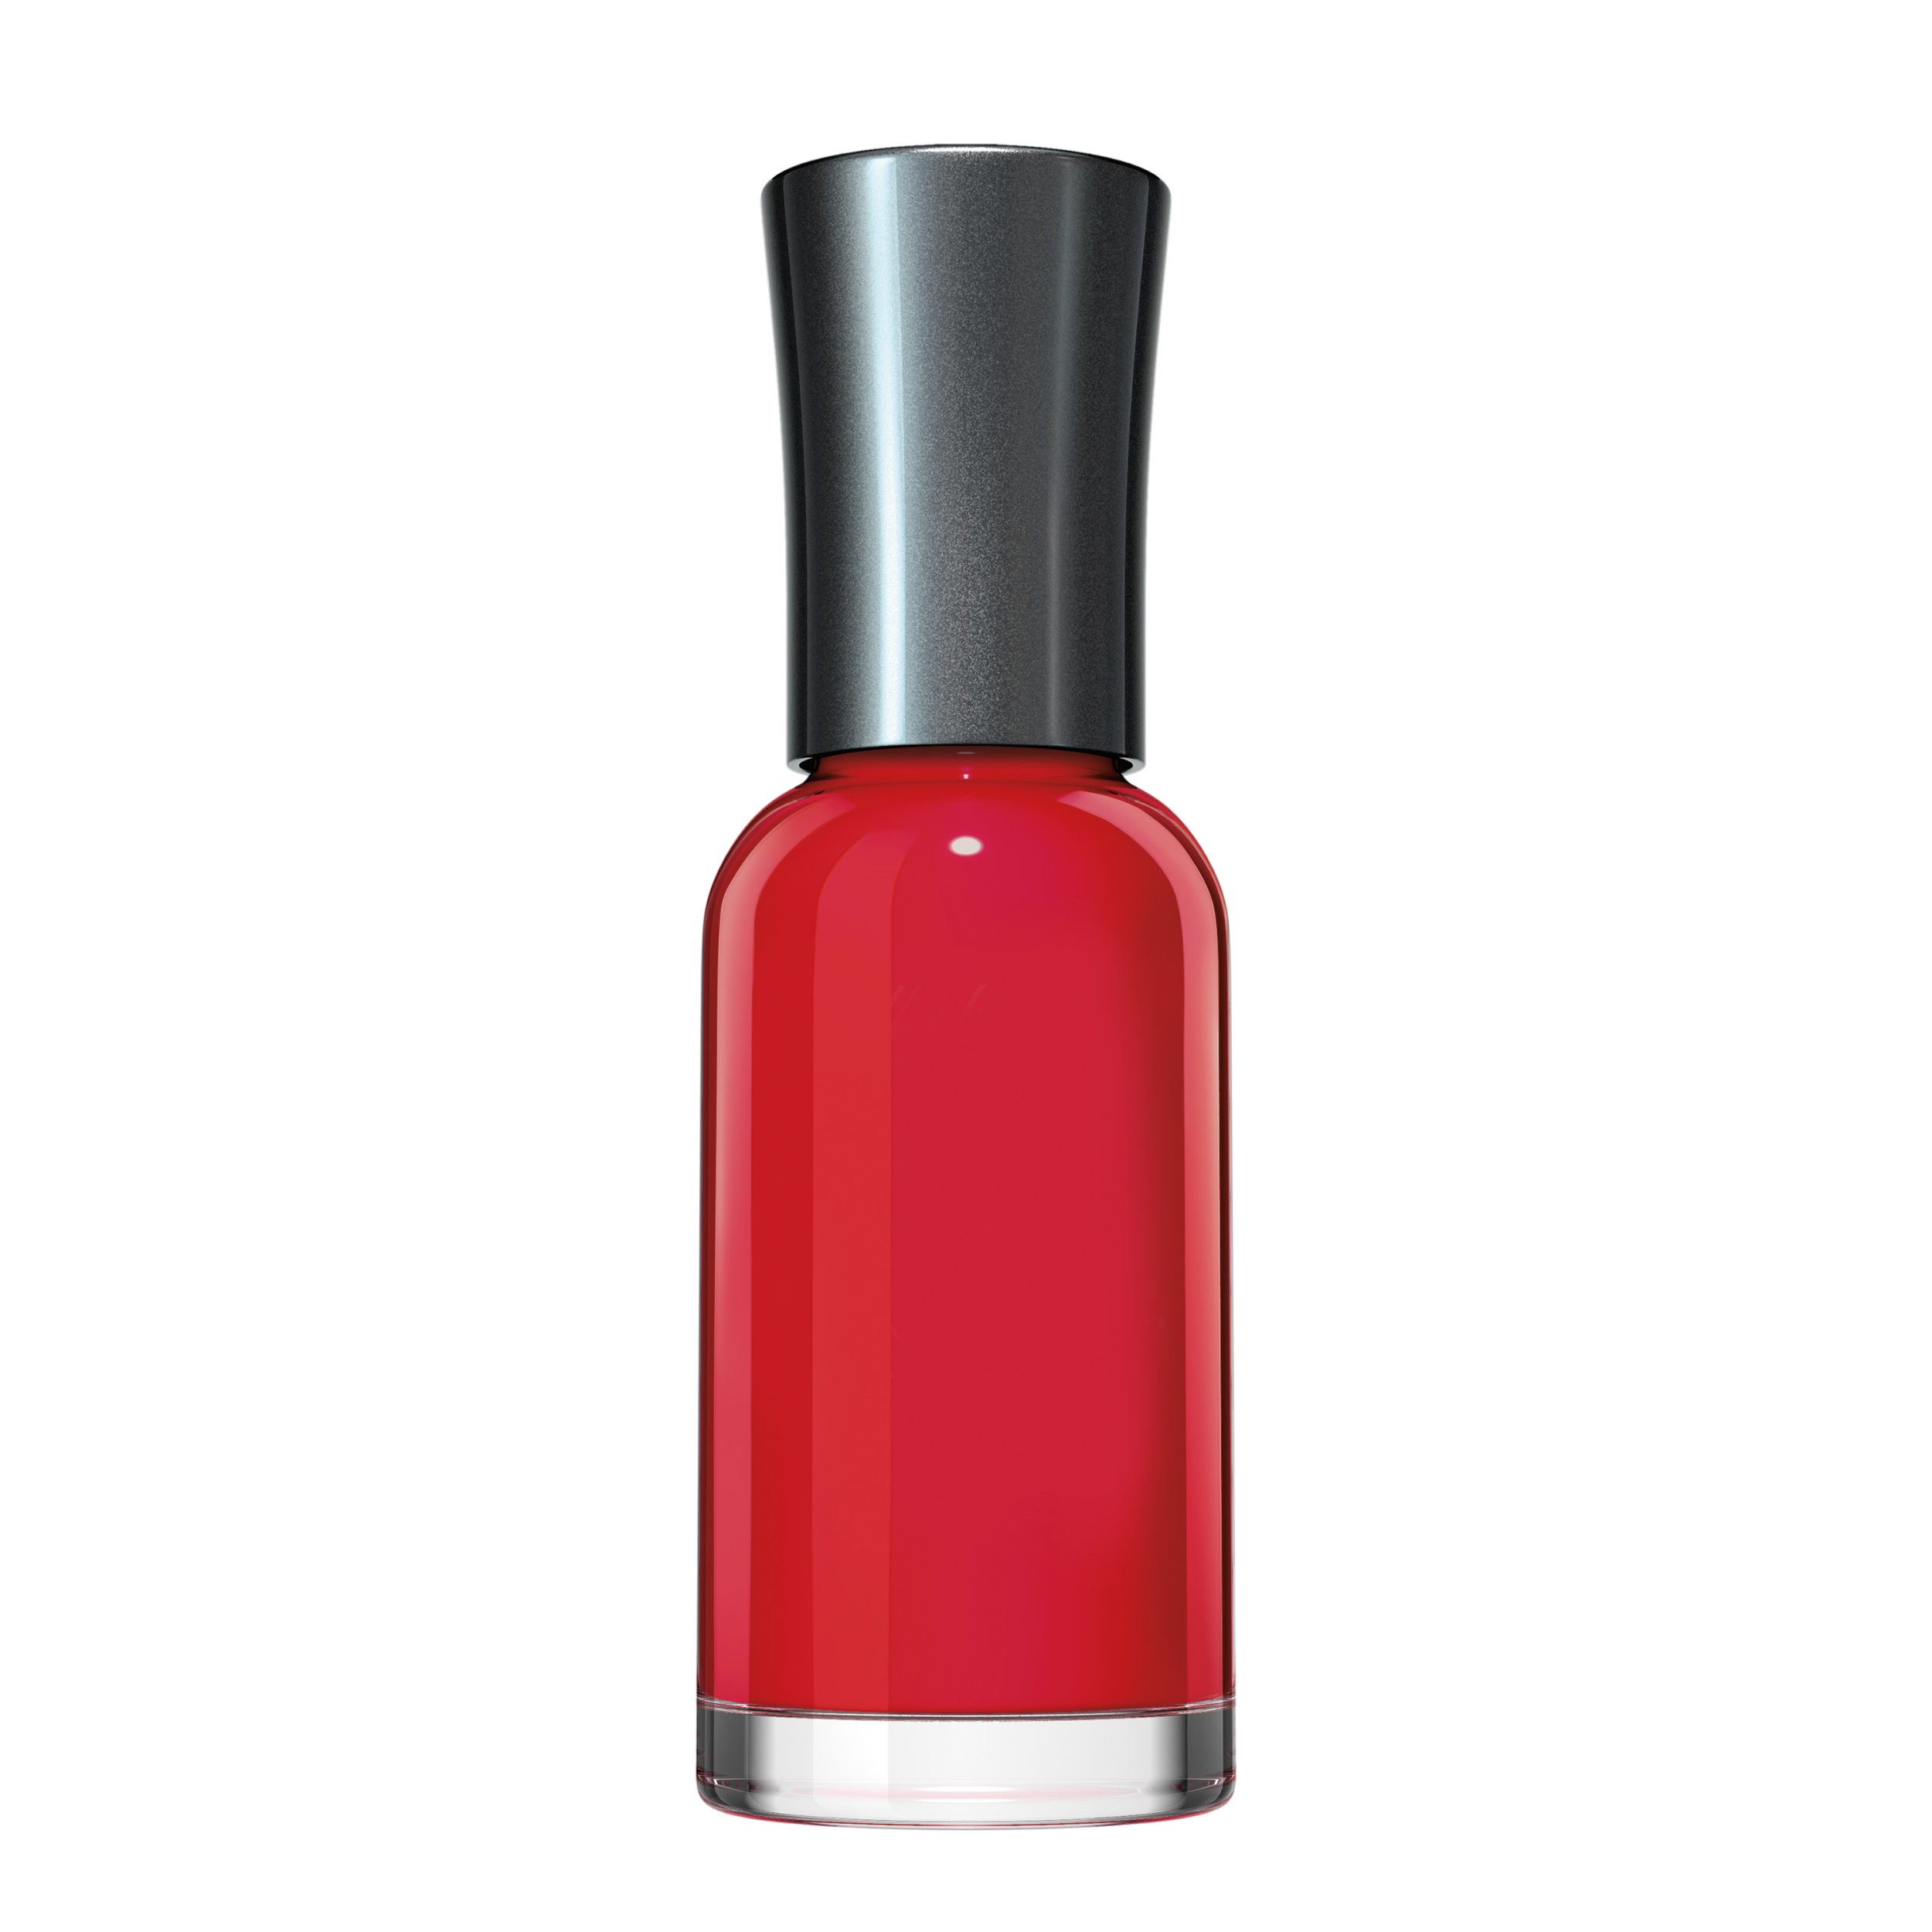 Sally Hansen Xtreme Wear Nail Polish, Pucker Up, 0.4 oz, Chip Resistant, Bold Color - image 9 of 14